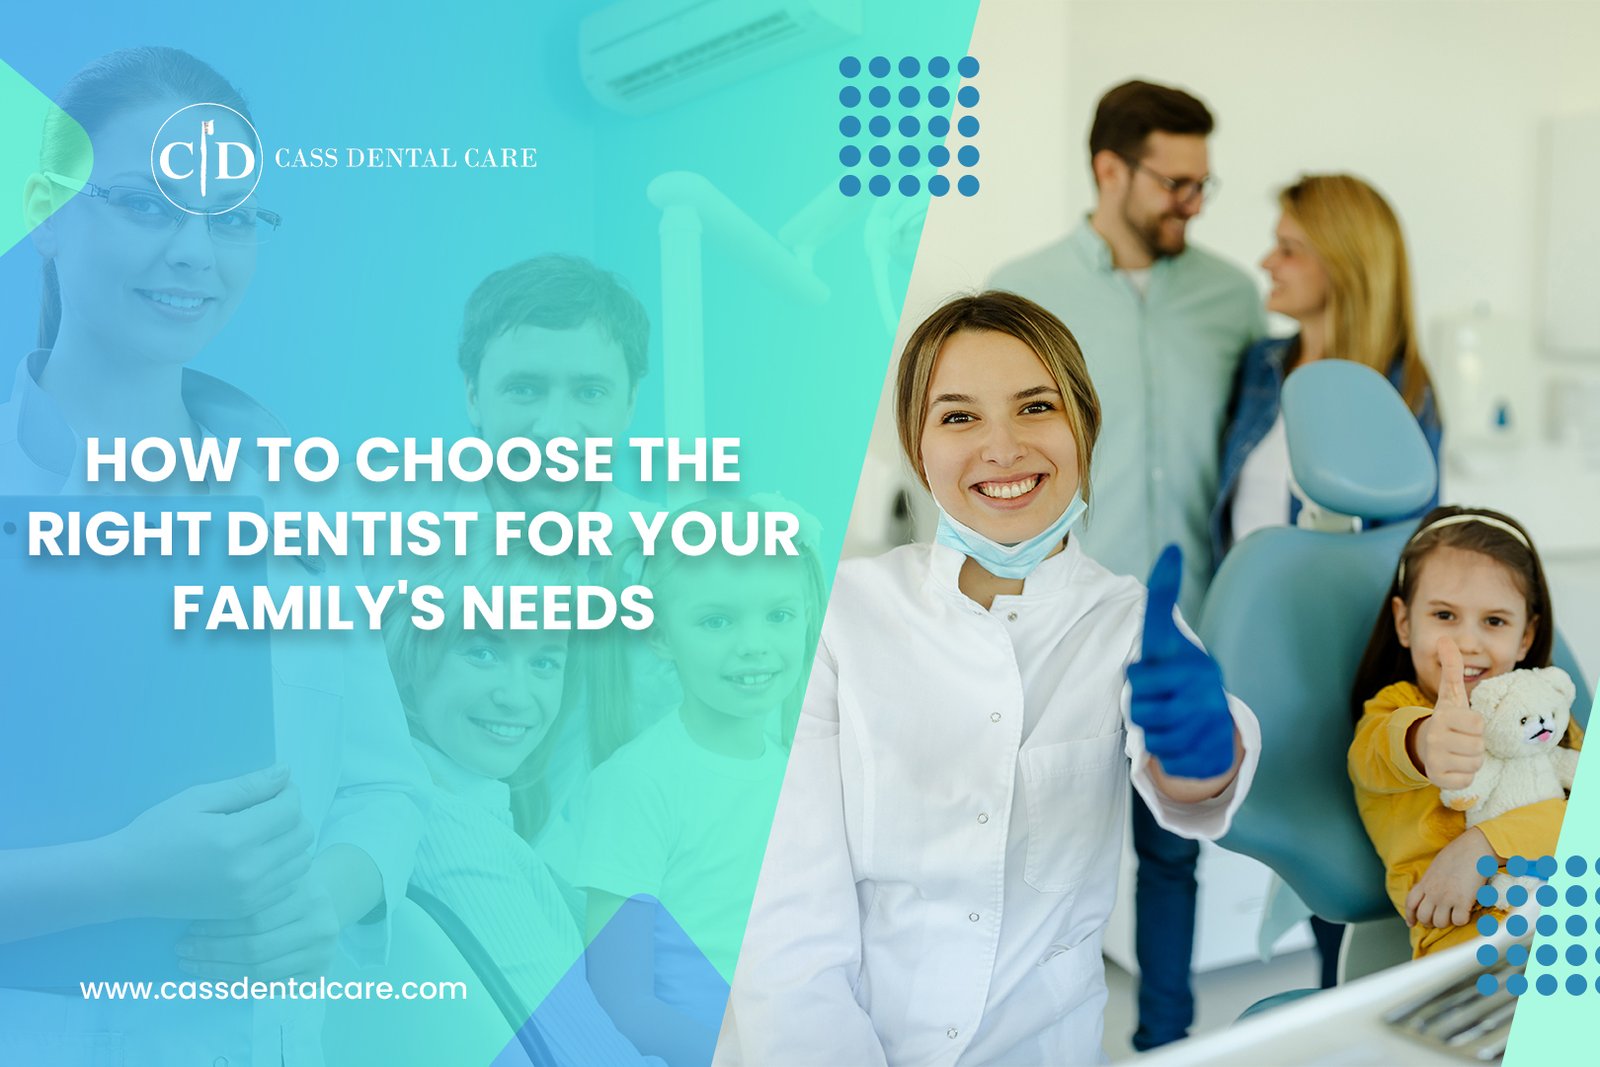 How to Choose the Right Dentist for Your Family's Needs